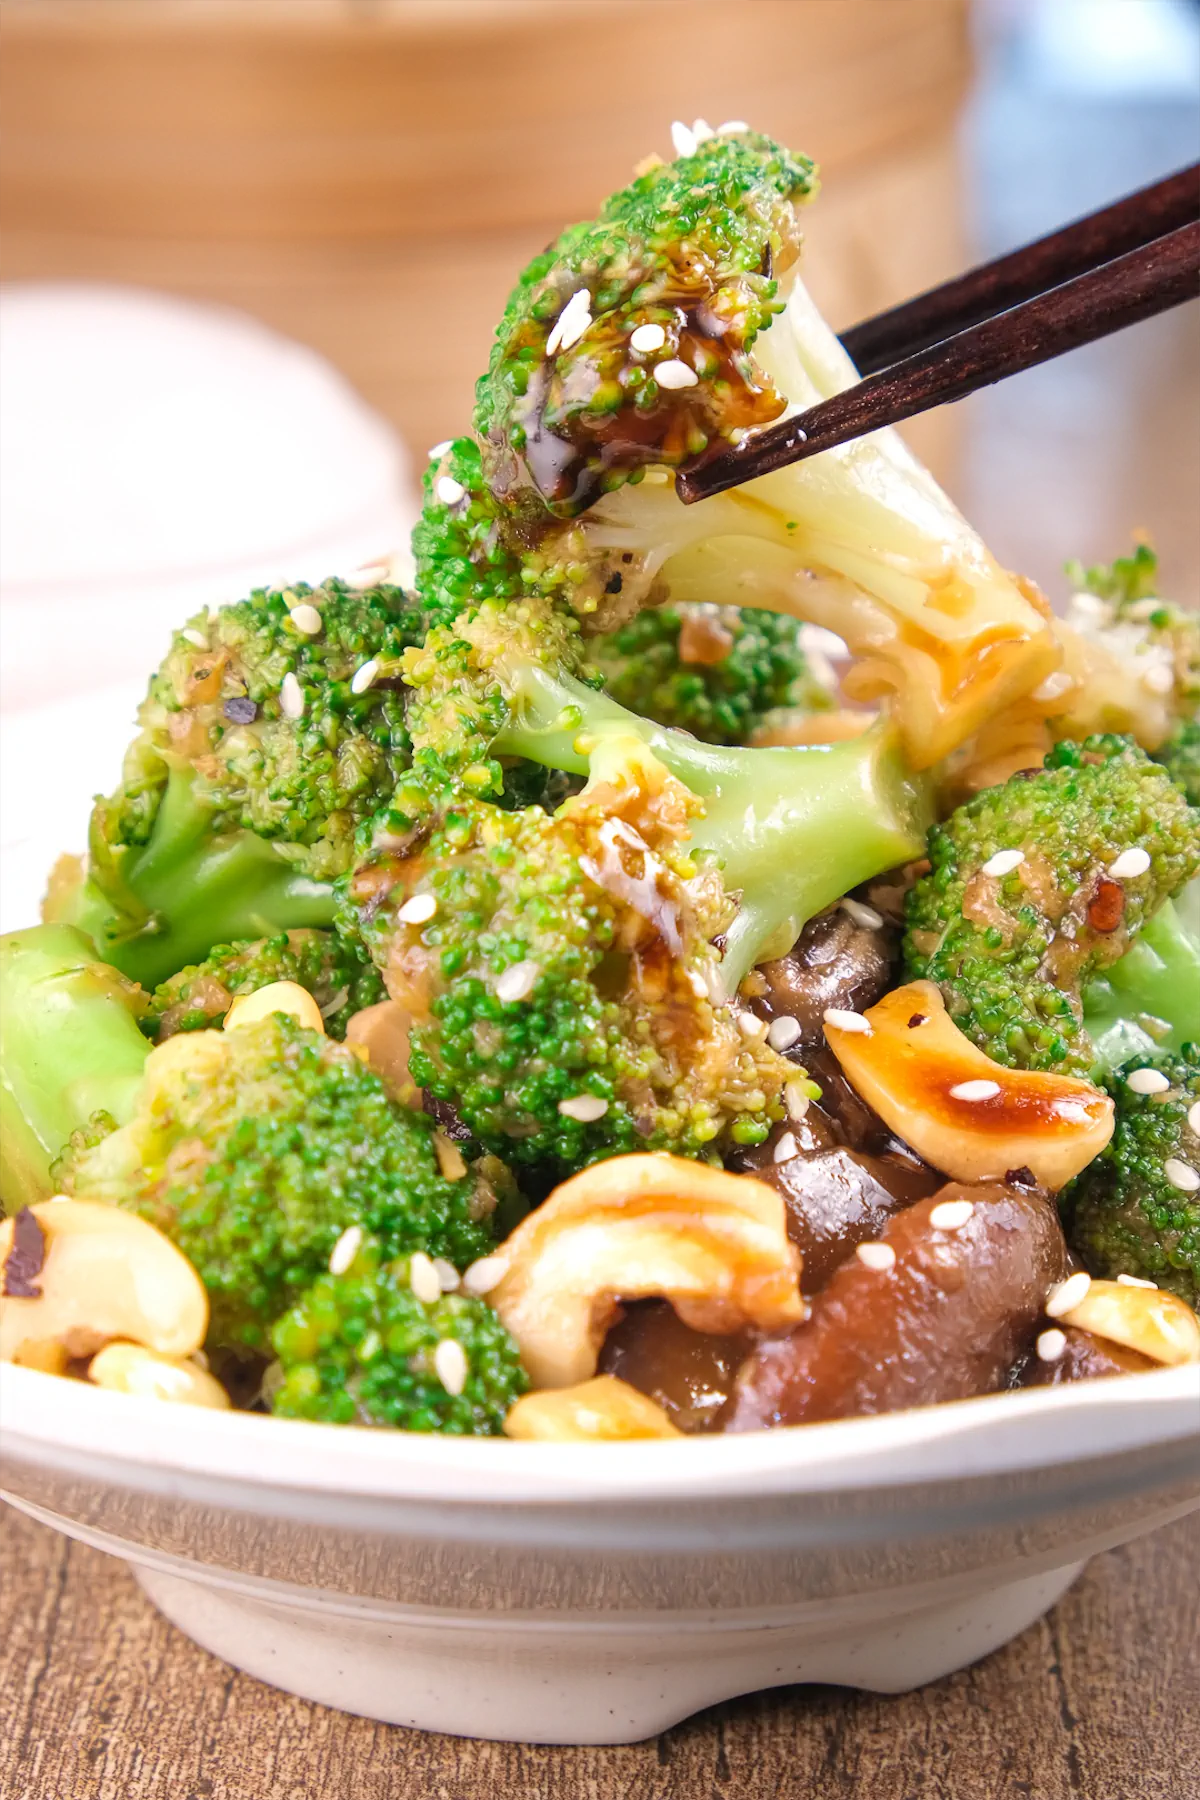 Homemade broccoli and mushrooms stir-fried in an Asian sauce, with a piece of broccoli being picked up using chopsticks.